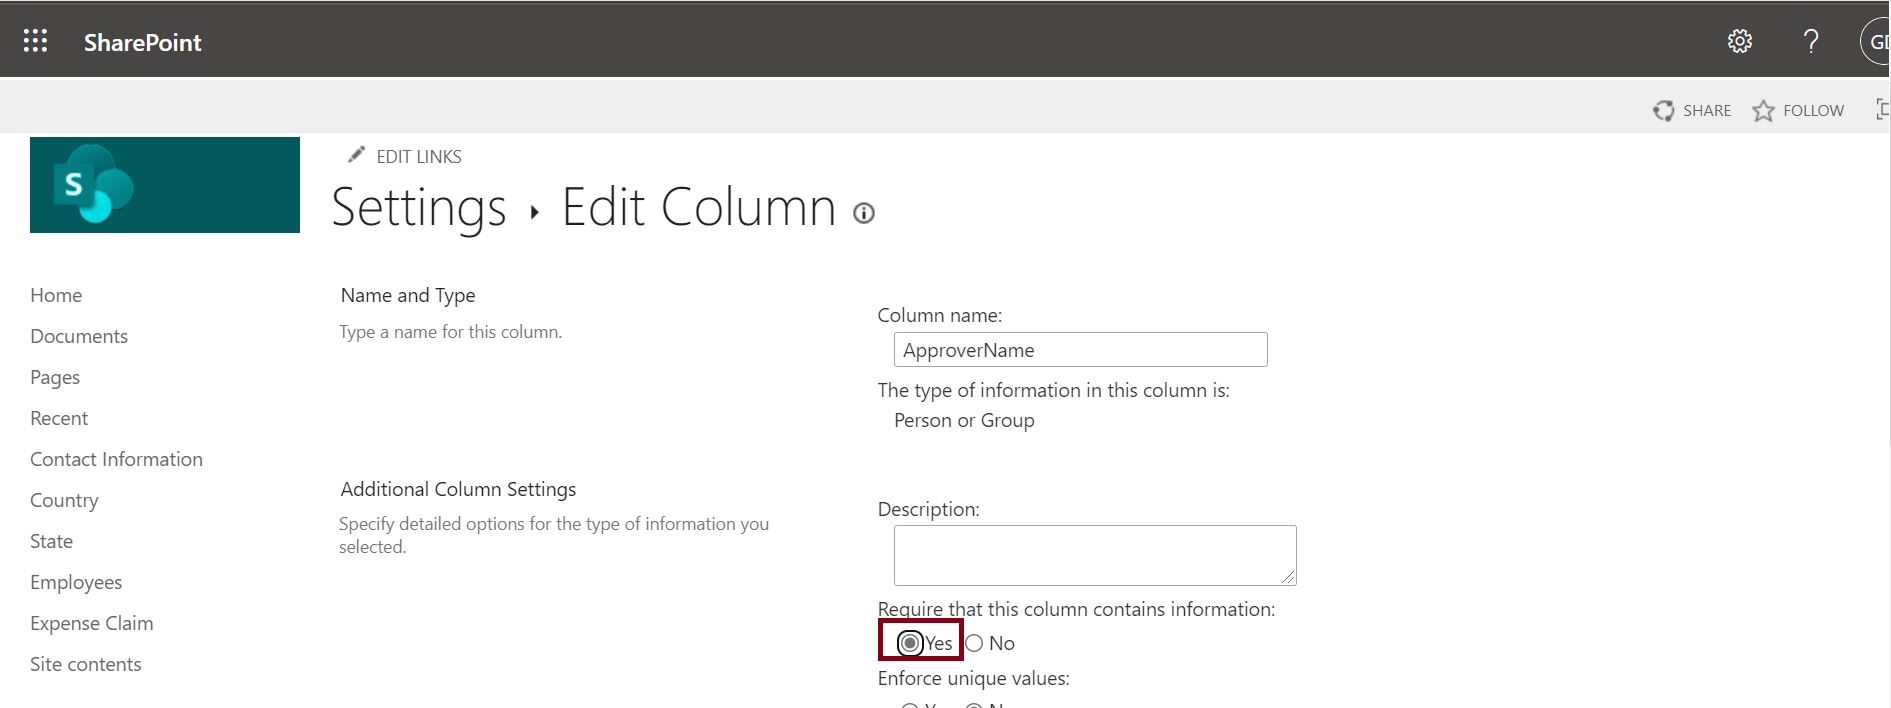 Conditionally show or hide columns in a SharePoint list, Make existing column as required in SharePoint Online